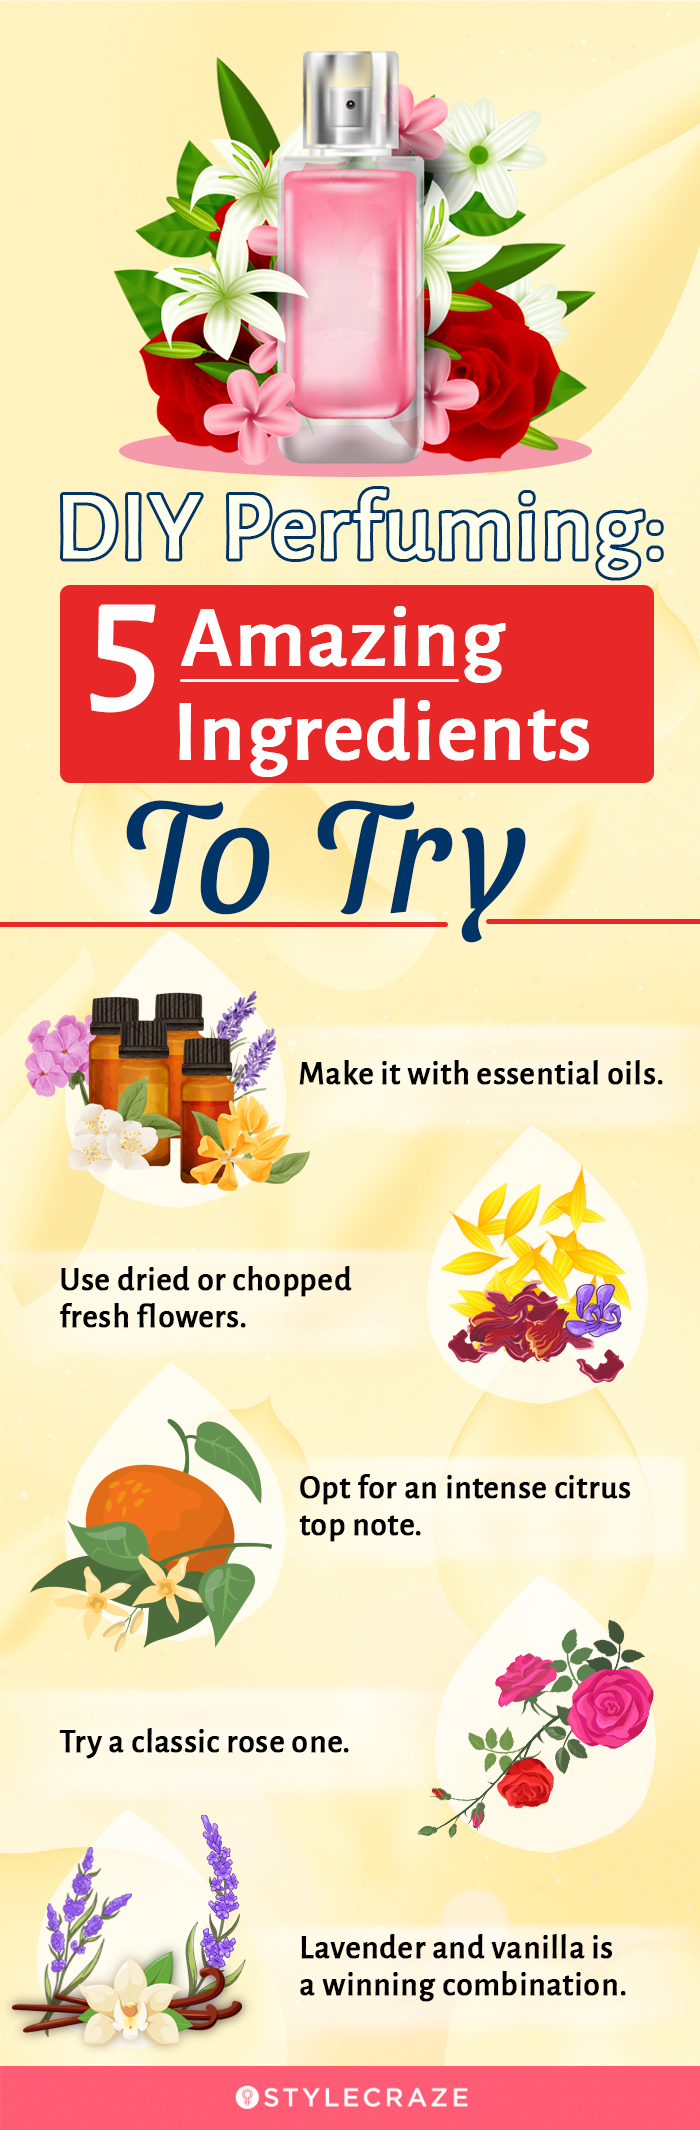 diy perfuming 5 amazing ingredients to try [infographic]